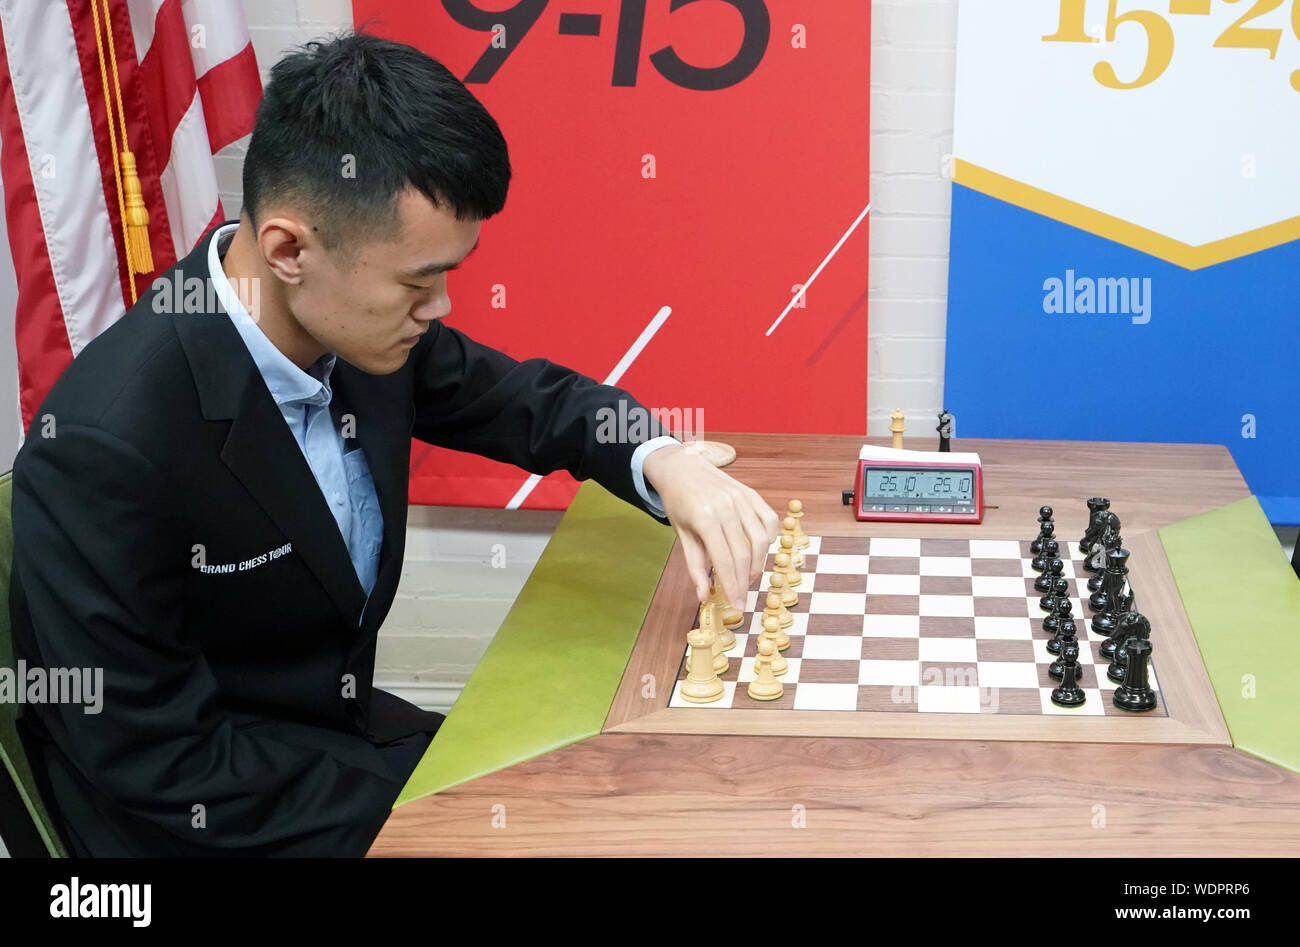 St. Louis, United States. 29th Aug, 2019. Grand Master Ding Liren prepares his board before playing Chess Grand Master Magnus Carlsen during their final playoff round of the Sinquefield Cup Tournament at the Saint Louis Chess Club in St. Louis on Thursday, August 29, 2019. Liren defeated Carlsen. Photo by Bill Greenblatt/UPI Credit: UPI/Alamy Live News Stock Photo